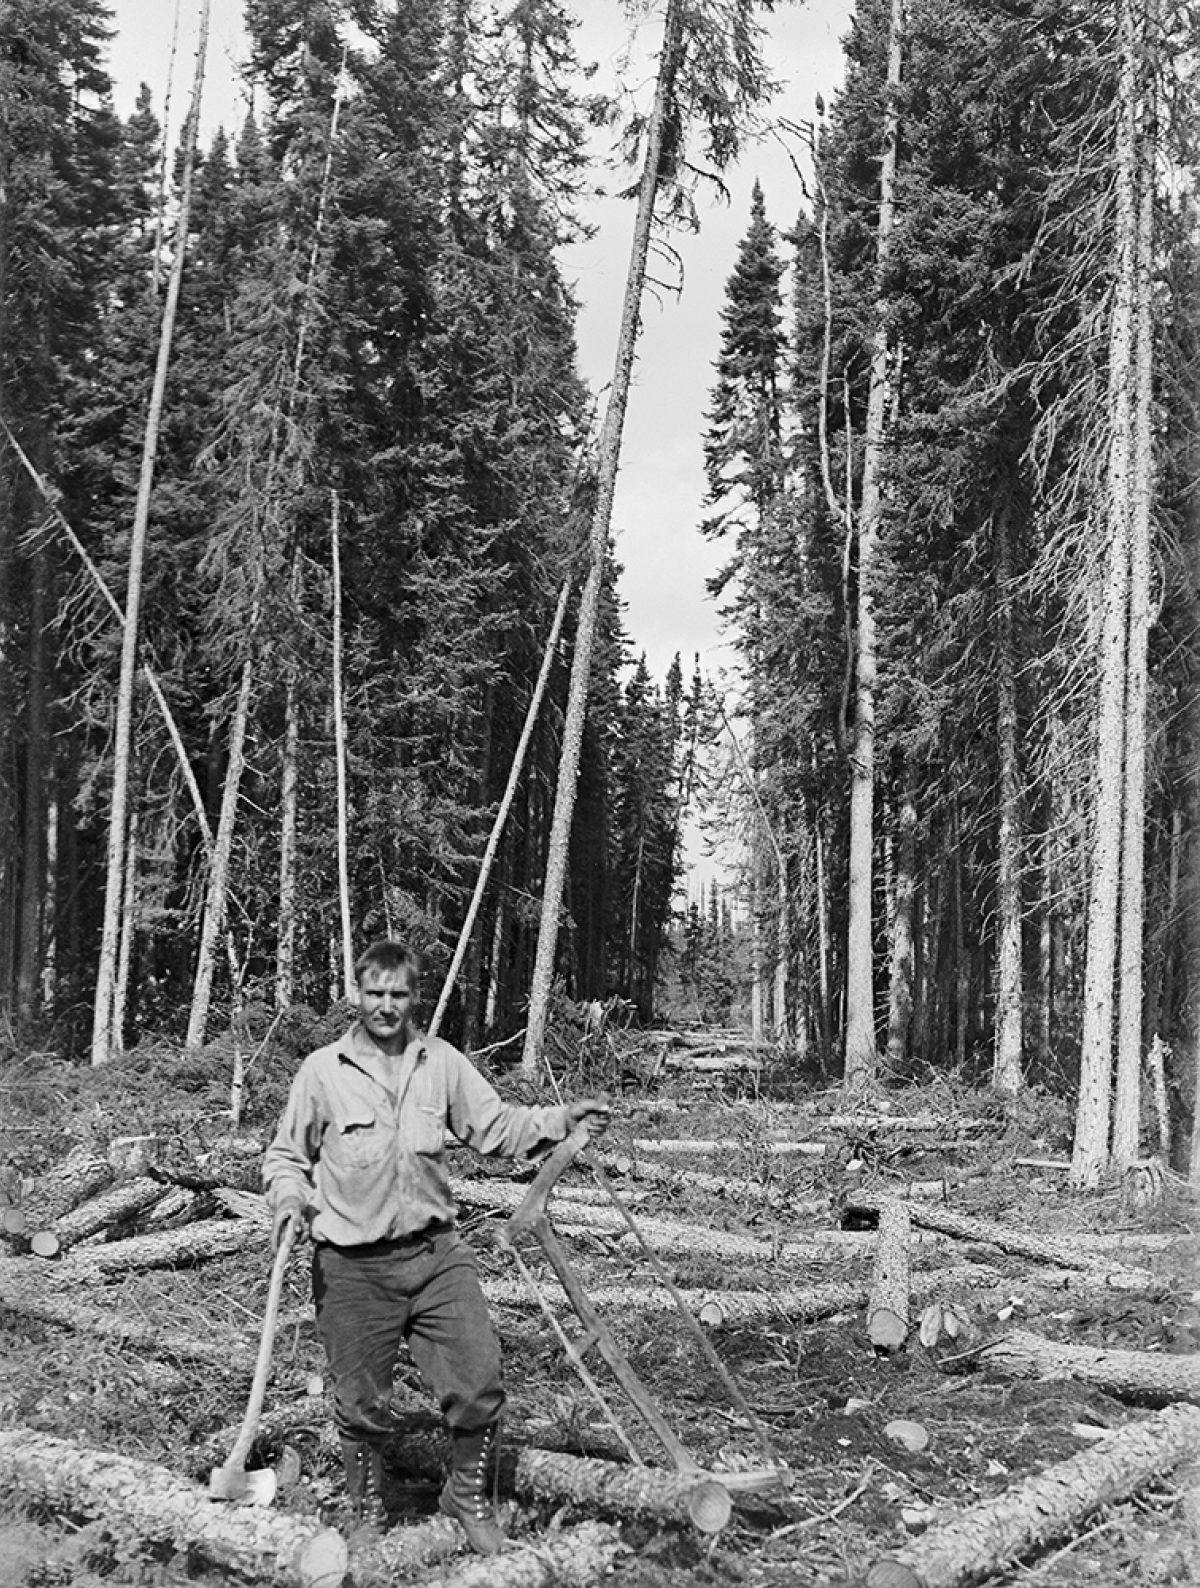 A ‘pulpwood worker’ near Port Arthur, Ontario, Canada, 1927. Photo: Sakari Pälsi / Picture Collections of the Finnish Heritage Agency